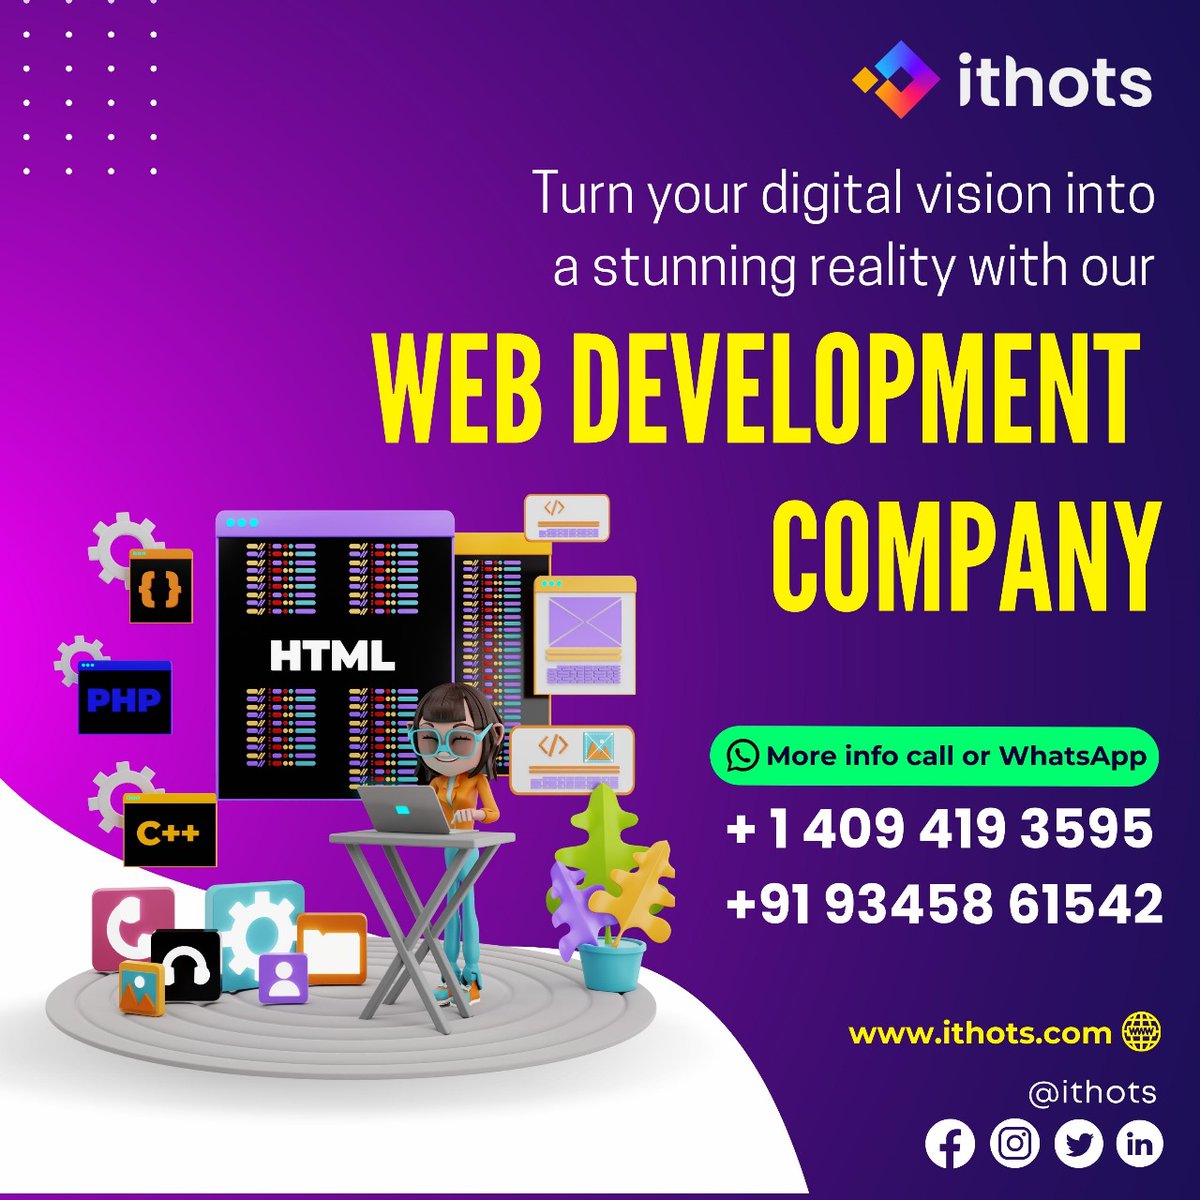 Enhance user engagement and conversions with our cutting-edge web development strategies
For More details : ithots.com
Call now :+1409 419 3595 ,+9193458 61542

#webdevelopment #webdevelopmentagency #webdevelopmentservices #webdevelopmentexpert #webdevelopmentcompany